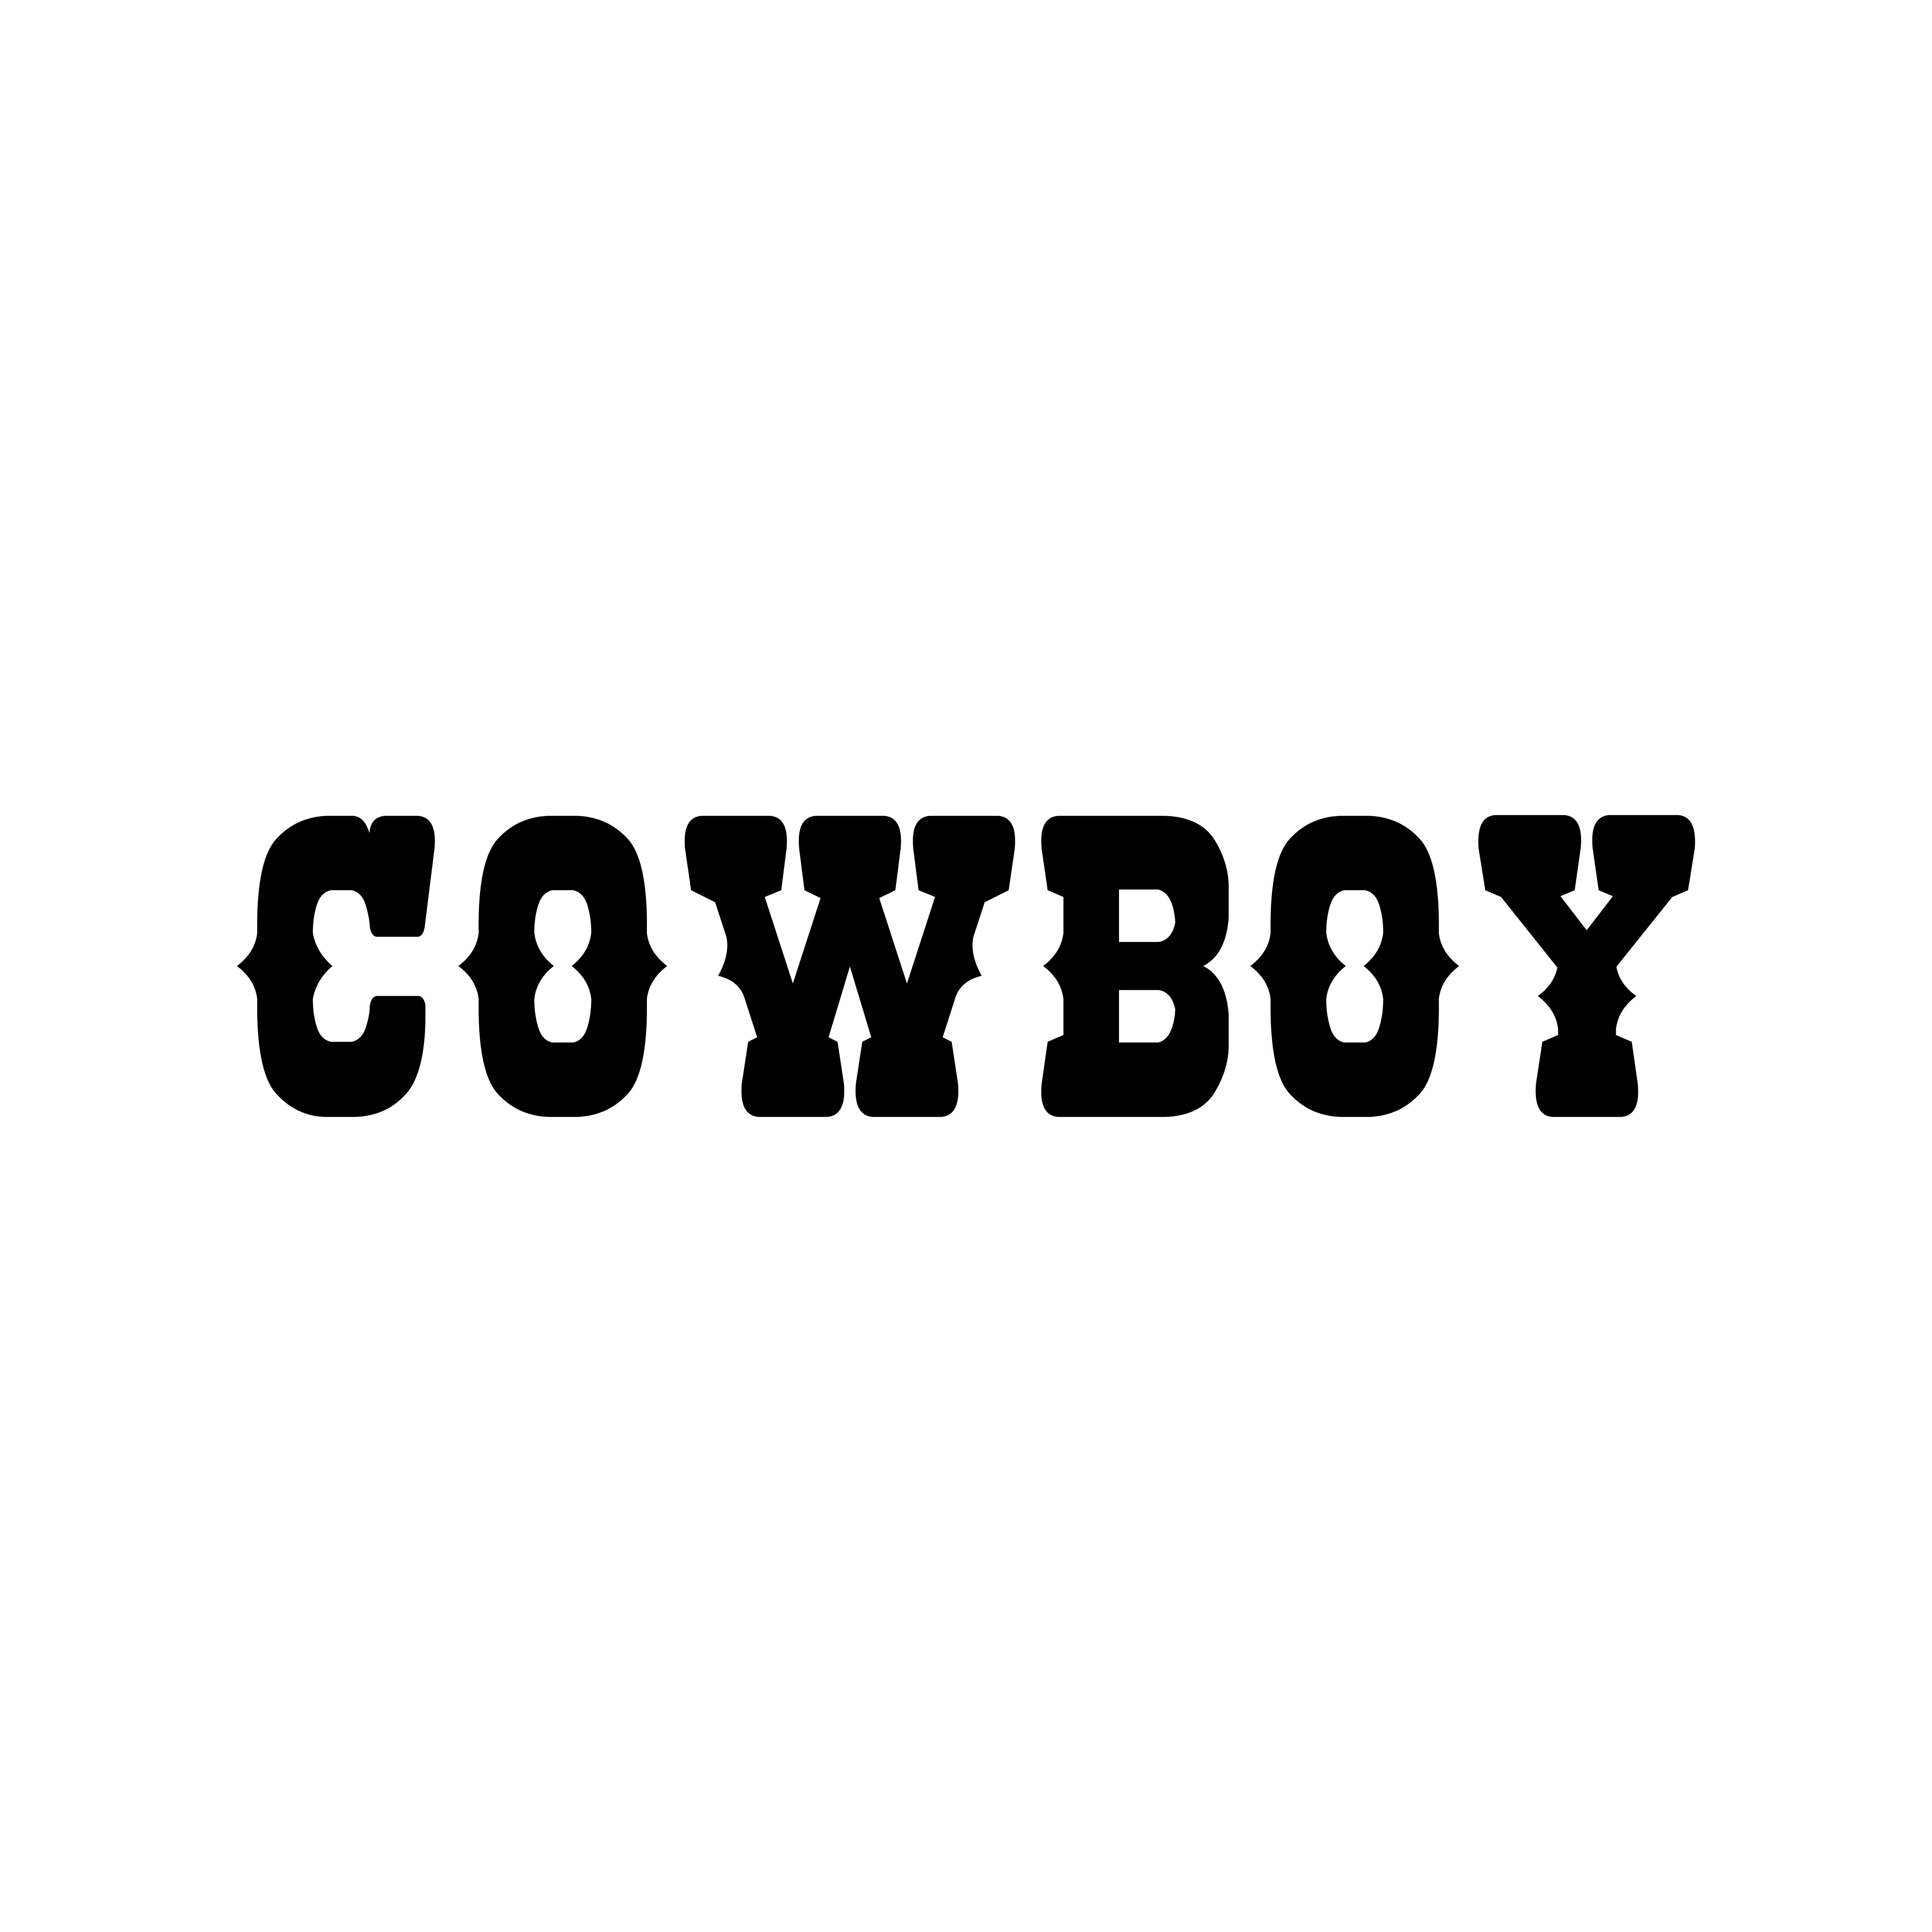 Vinyl Wall Art Decal - Cowboy - 5" x 25" - Trendy Fun Lovely Positive Quote Stic